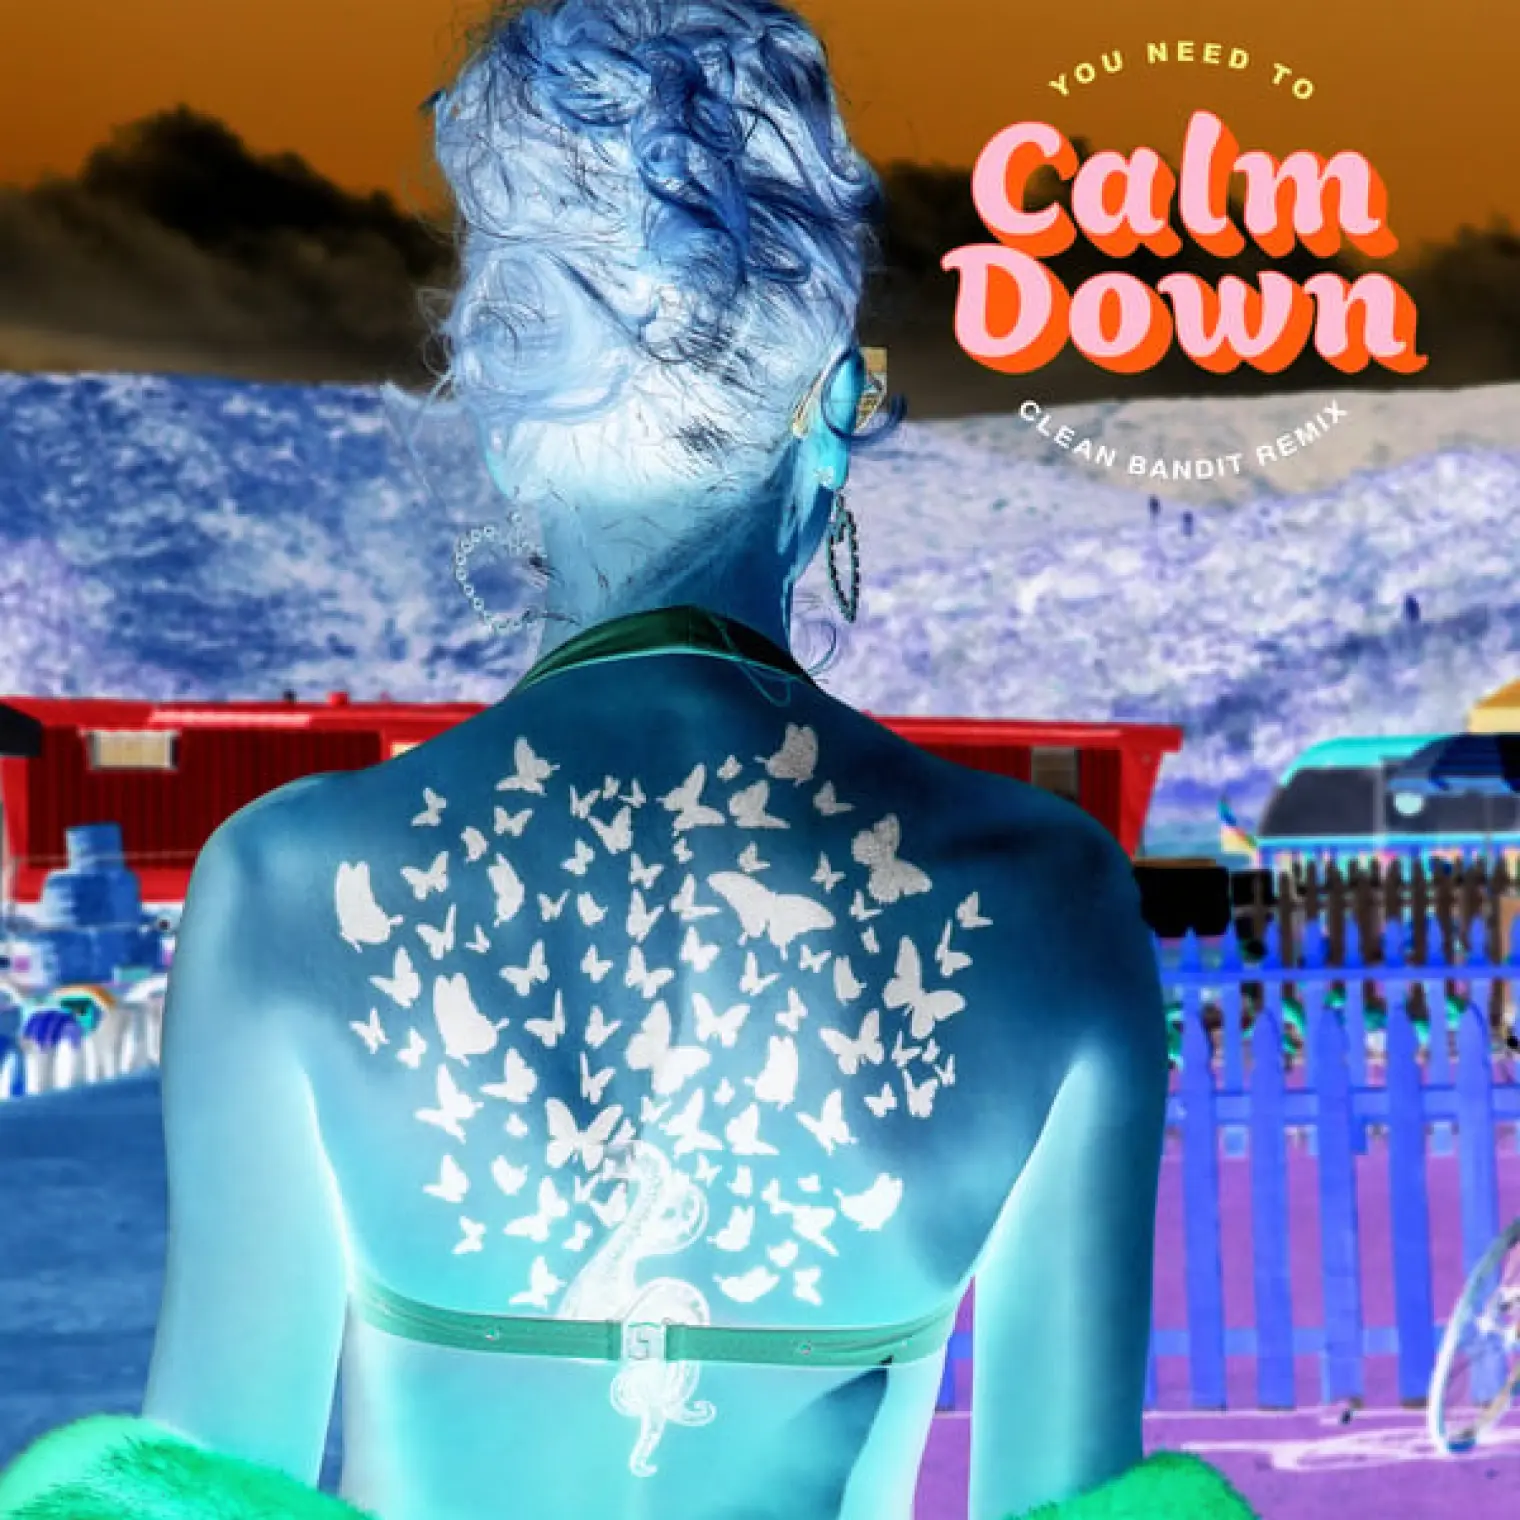 You Need To Calm Down -  Taylor Swift 